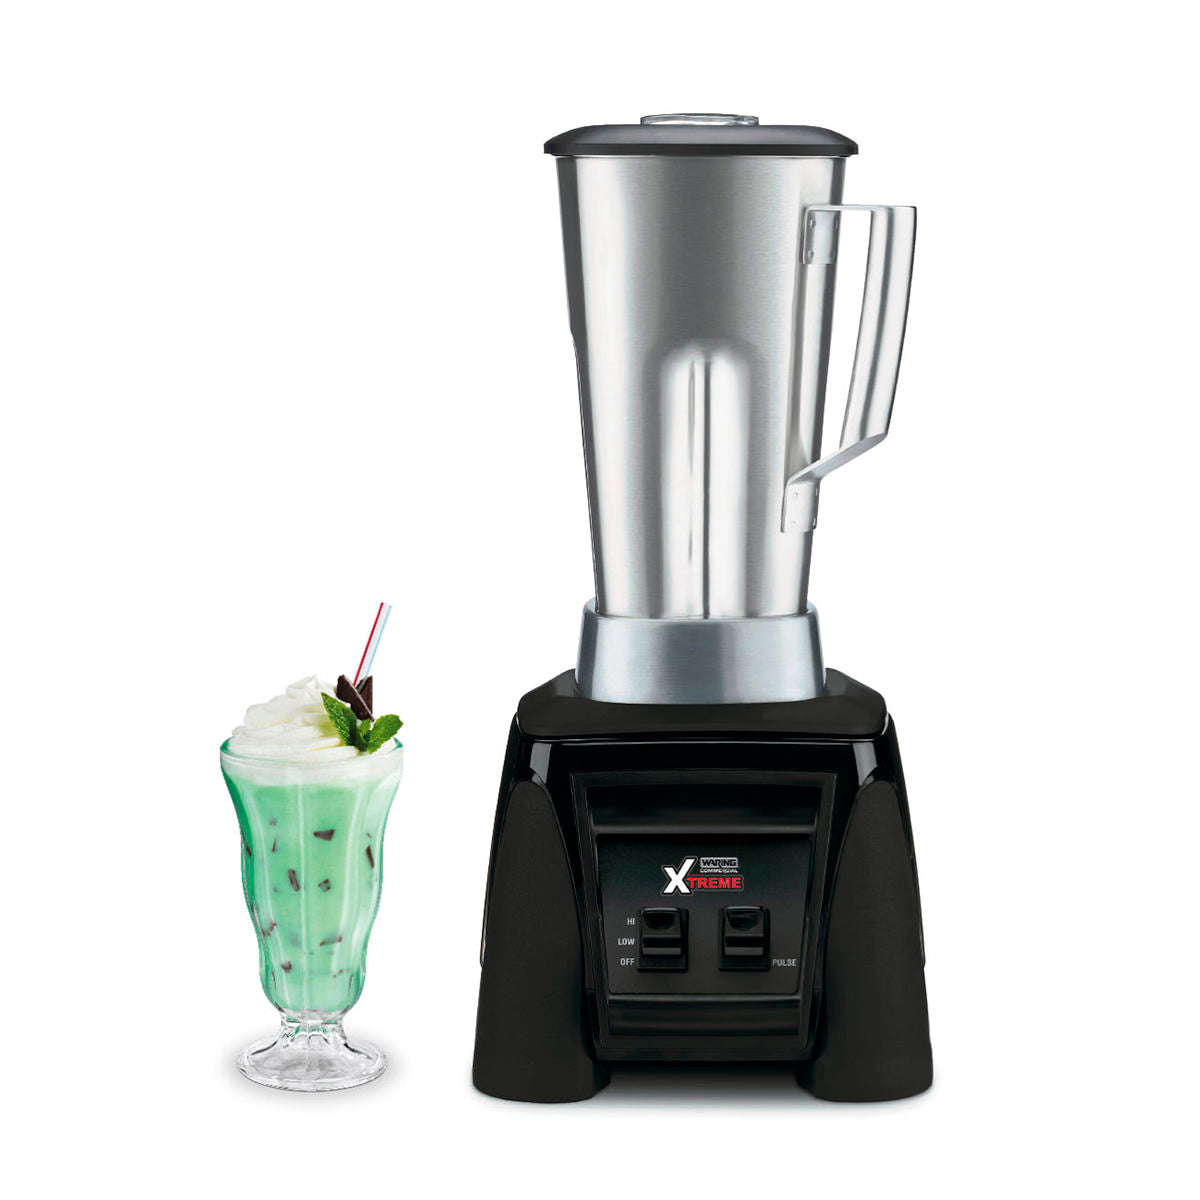 MX1000XTS Heavy-Duty Blender with 64 oz Stainless Steel Jar by Waring Commercial